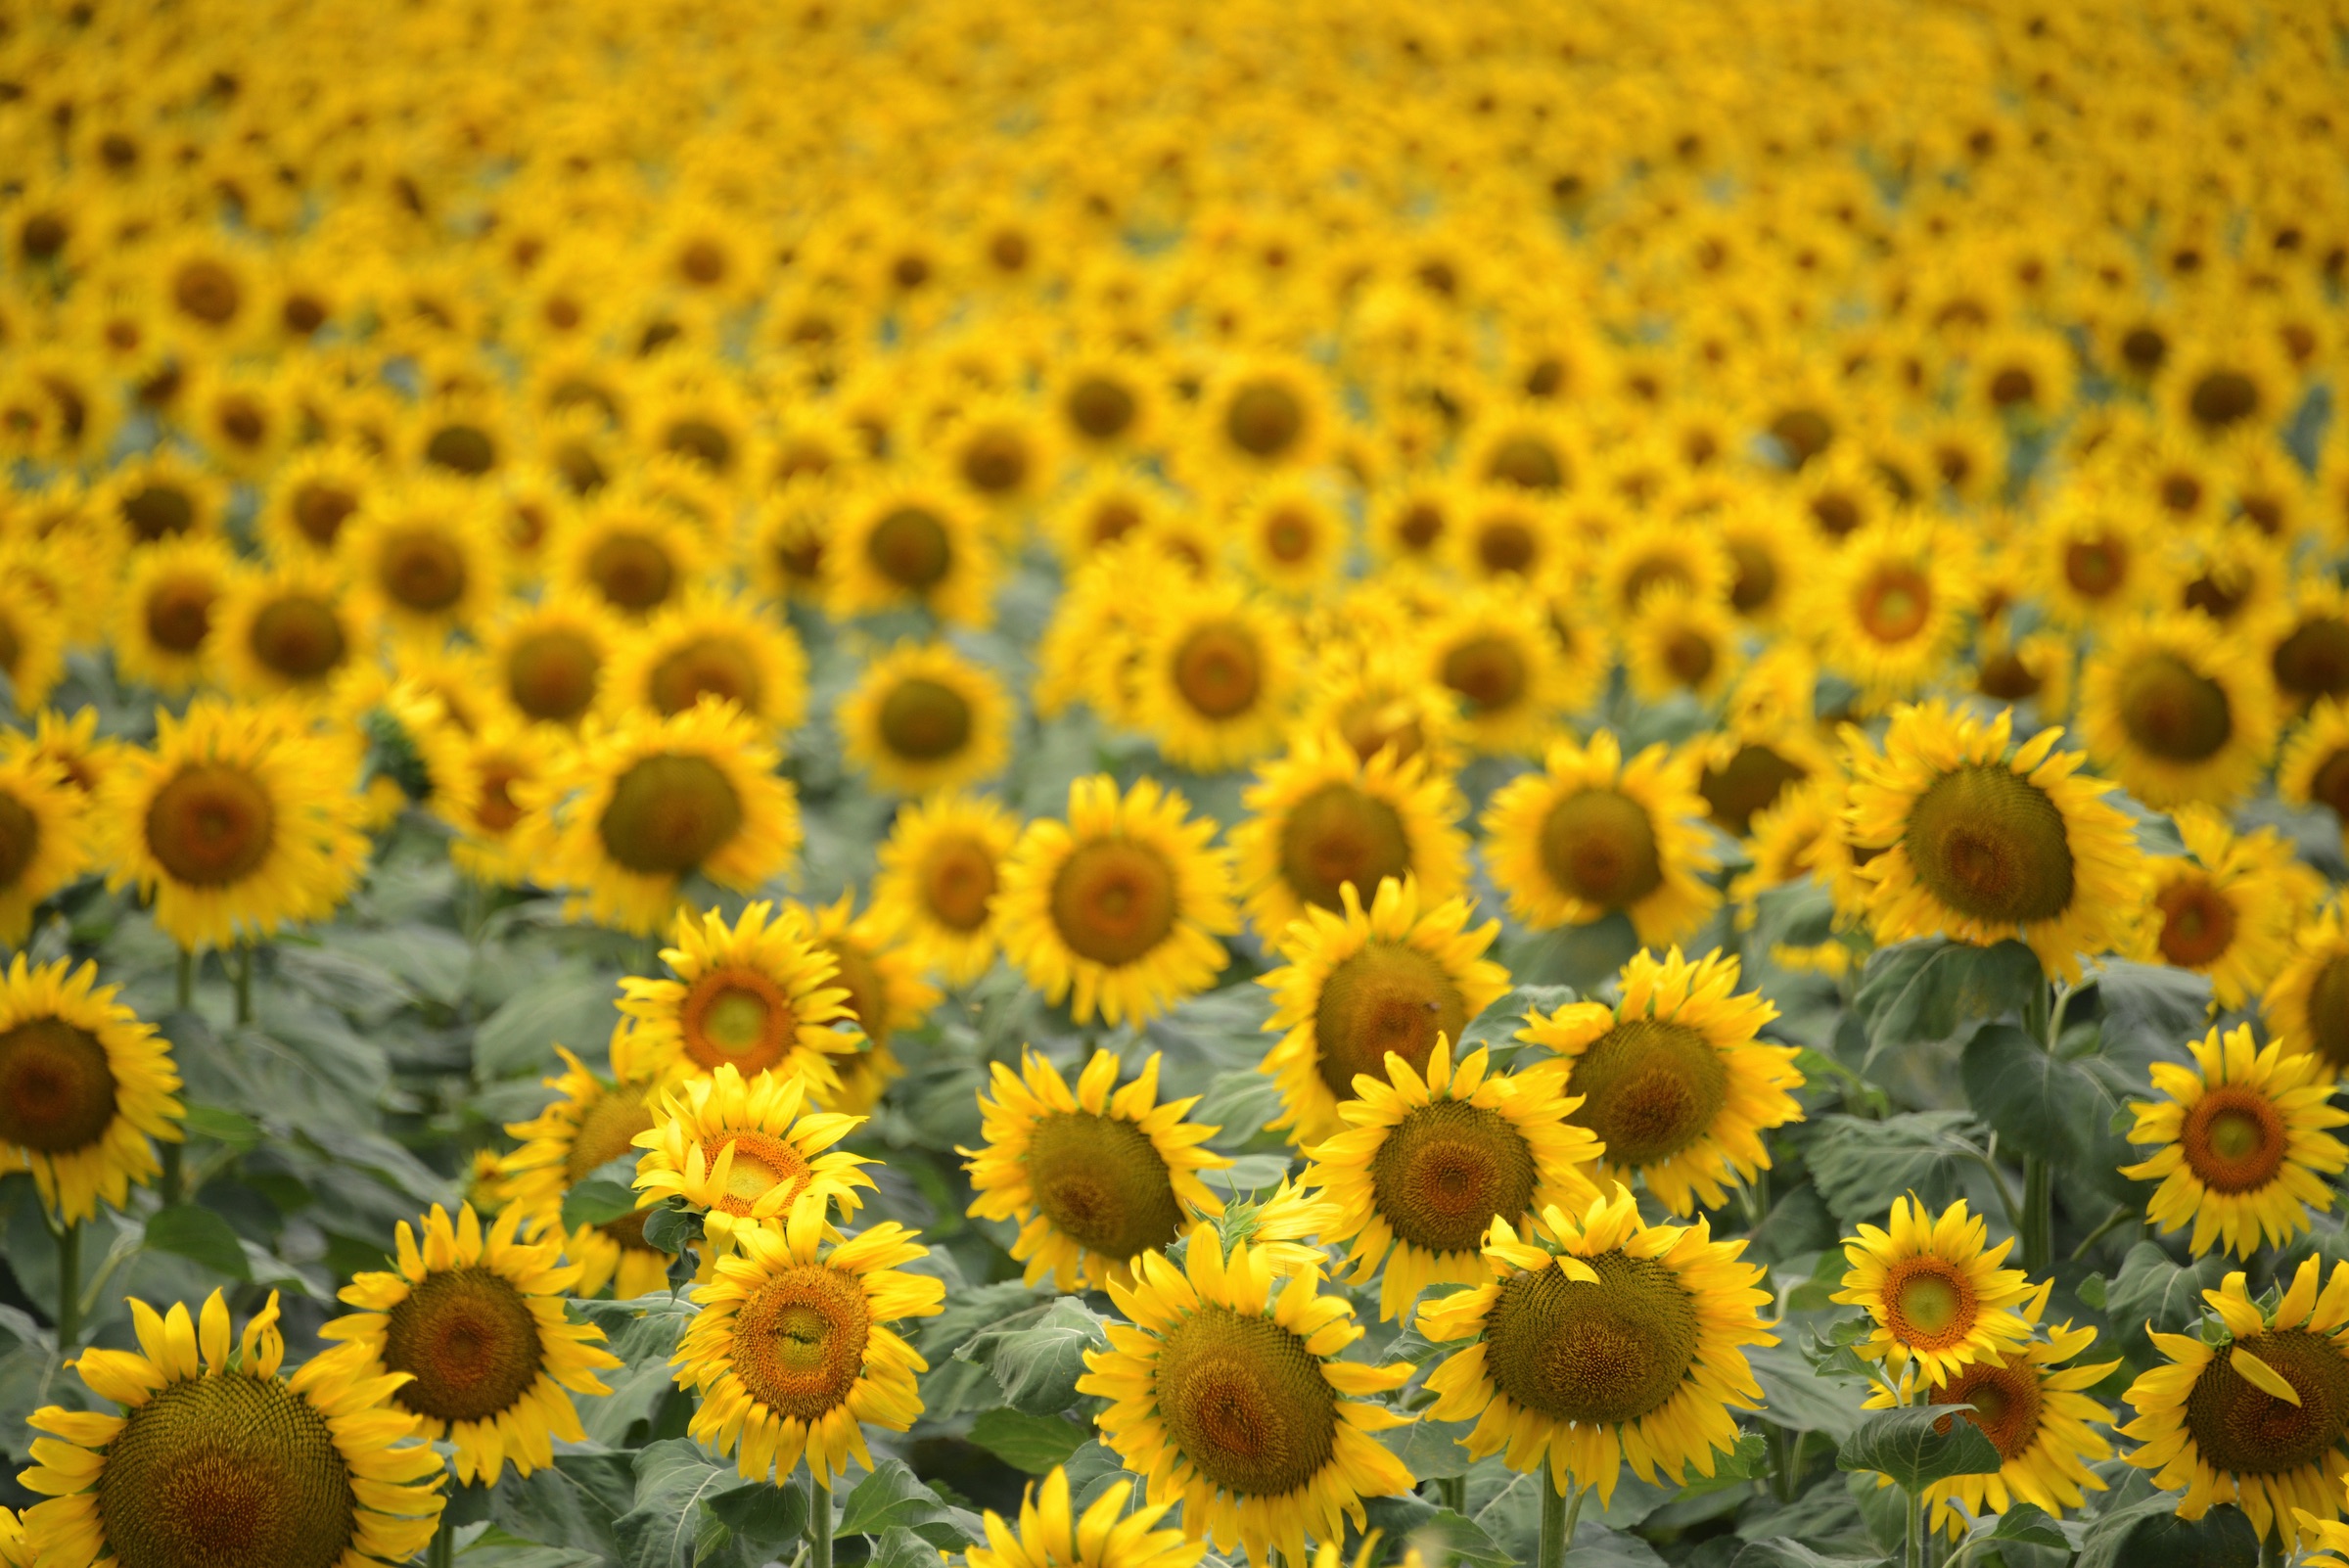 Photo of a field of sunflowers